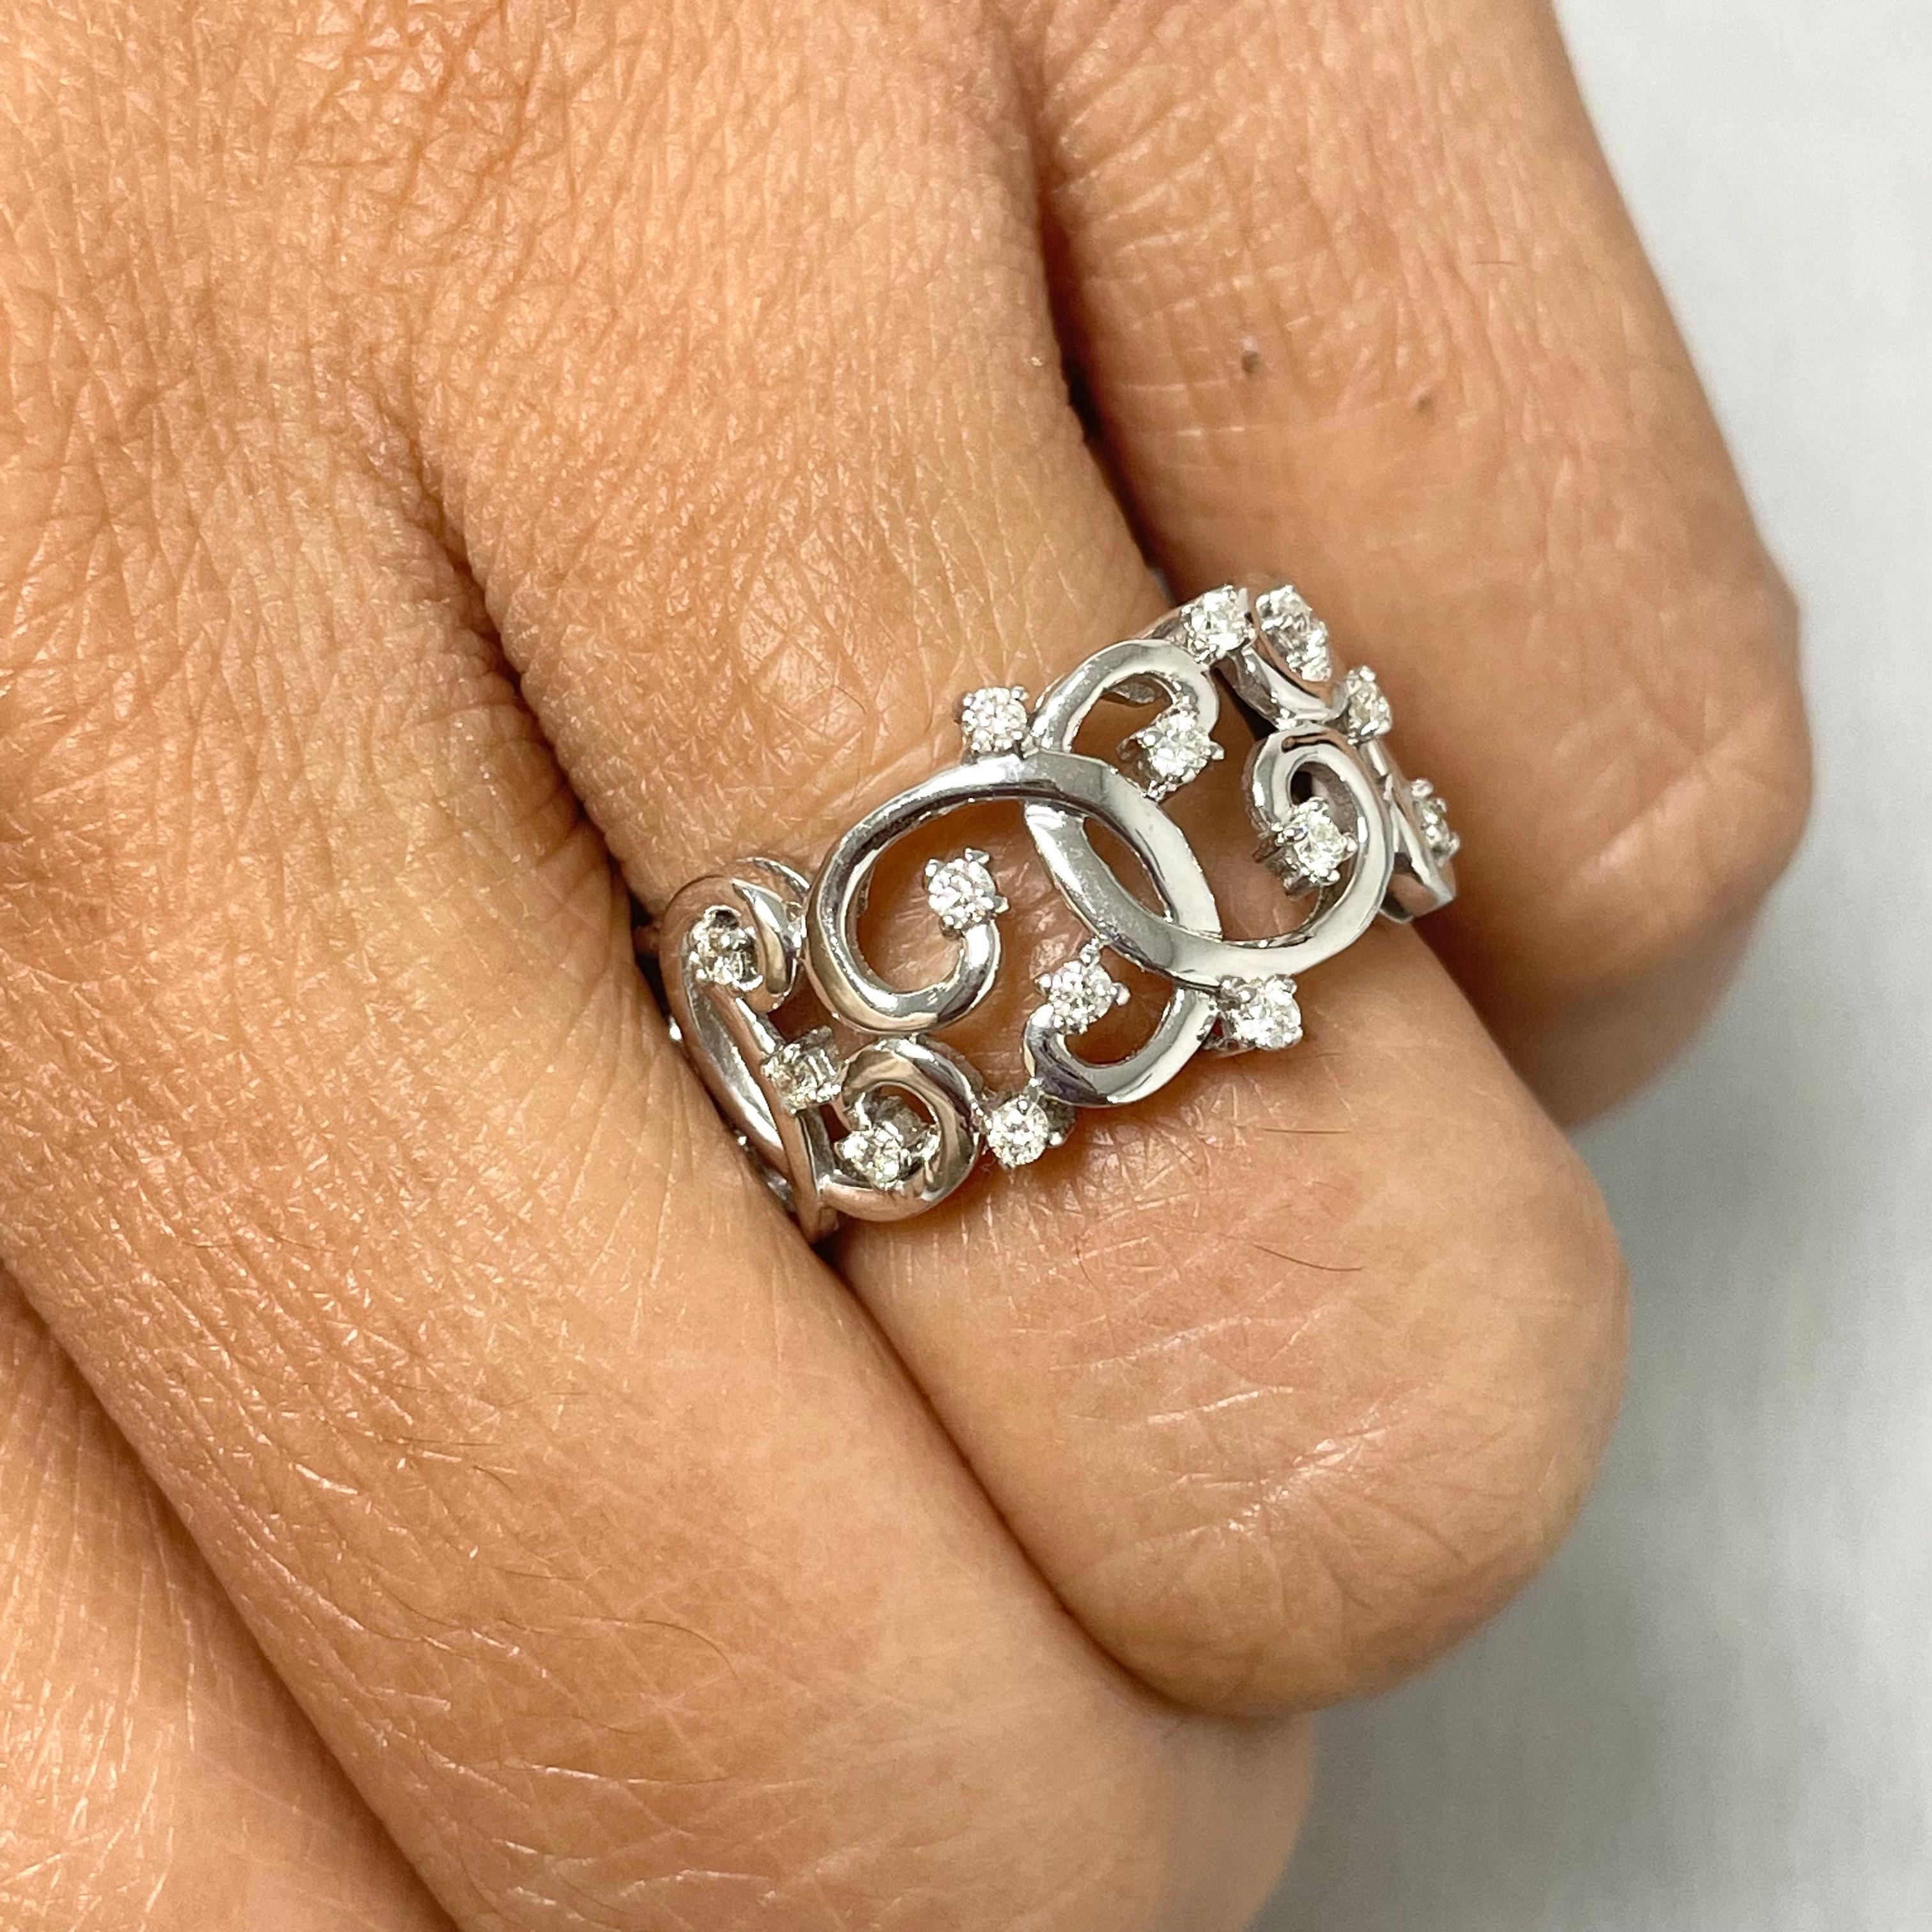 Playful and stylish, the Curves Diamond is a ideal accessory to dress up your finger and give it some stated character and grace. 

Diamonds Shape: Round
Diamonds Weight: 0.20 ct 
Diamond Color: G - H
Diamond Clarity: VS (Very Slightly Included)